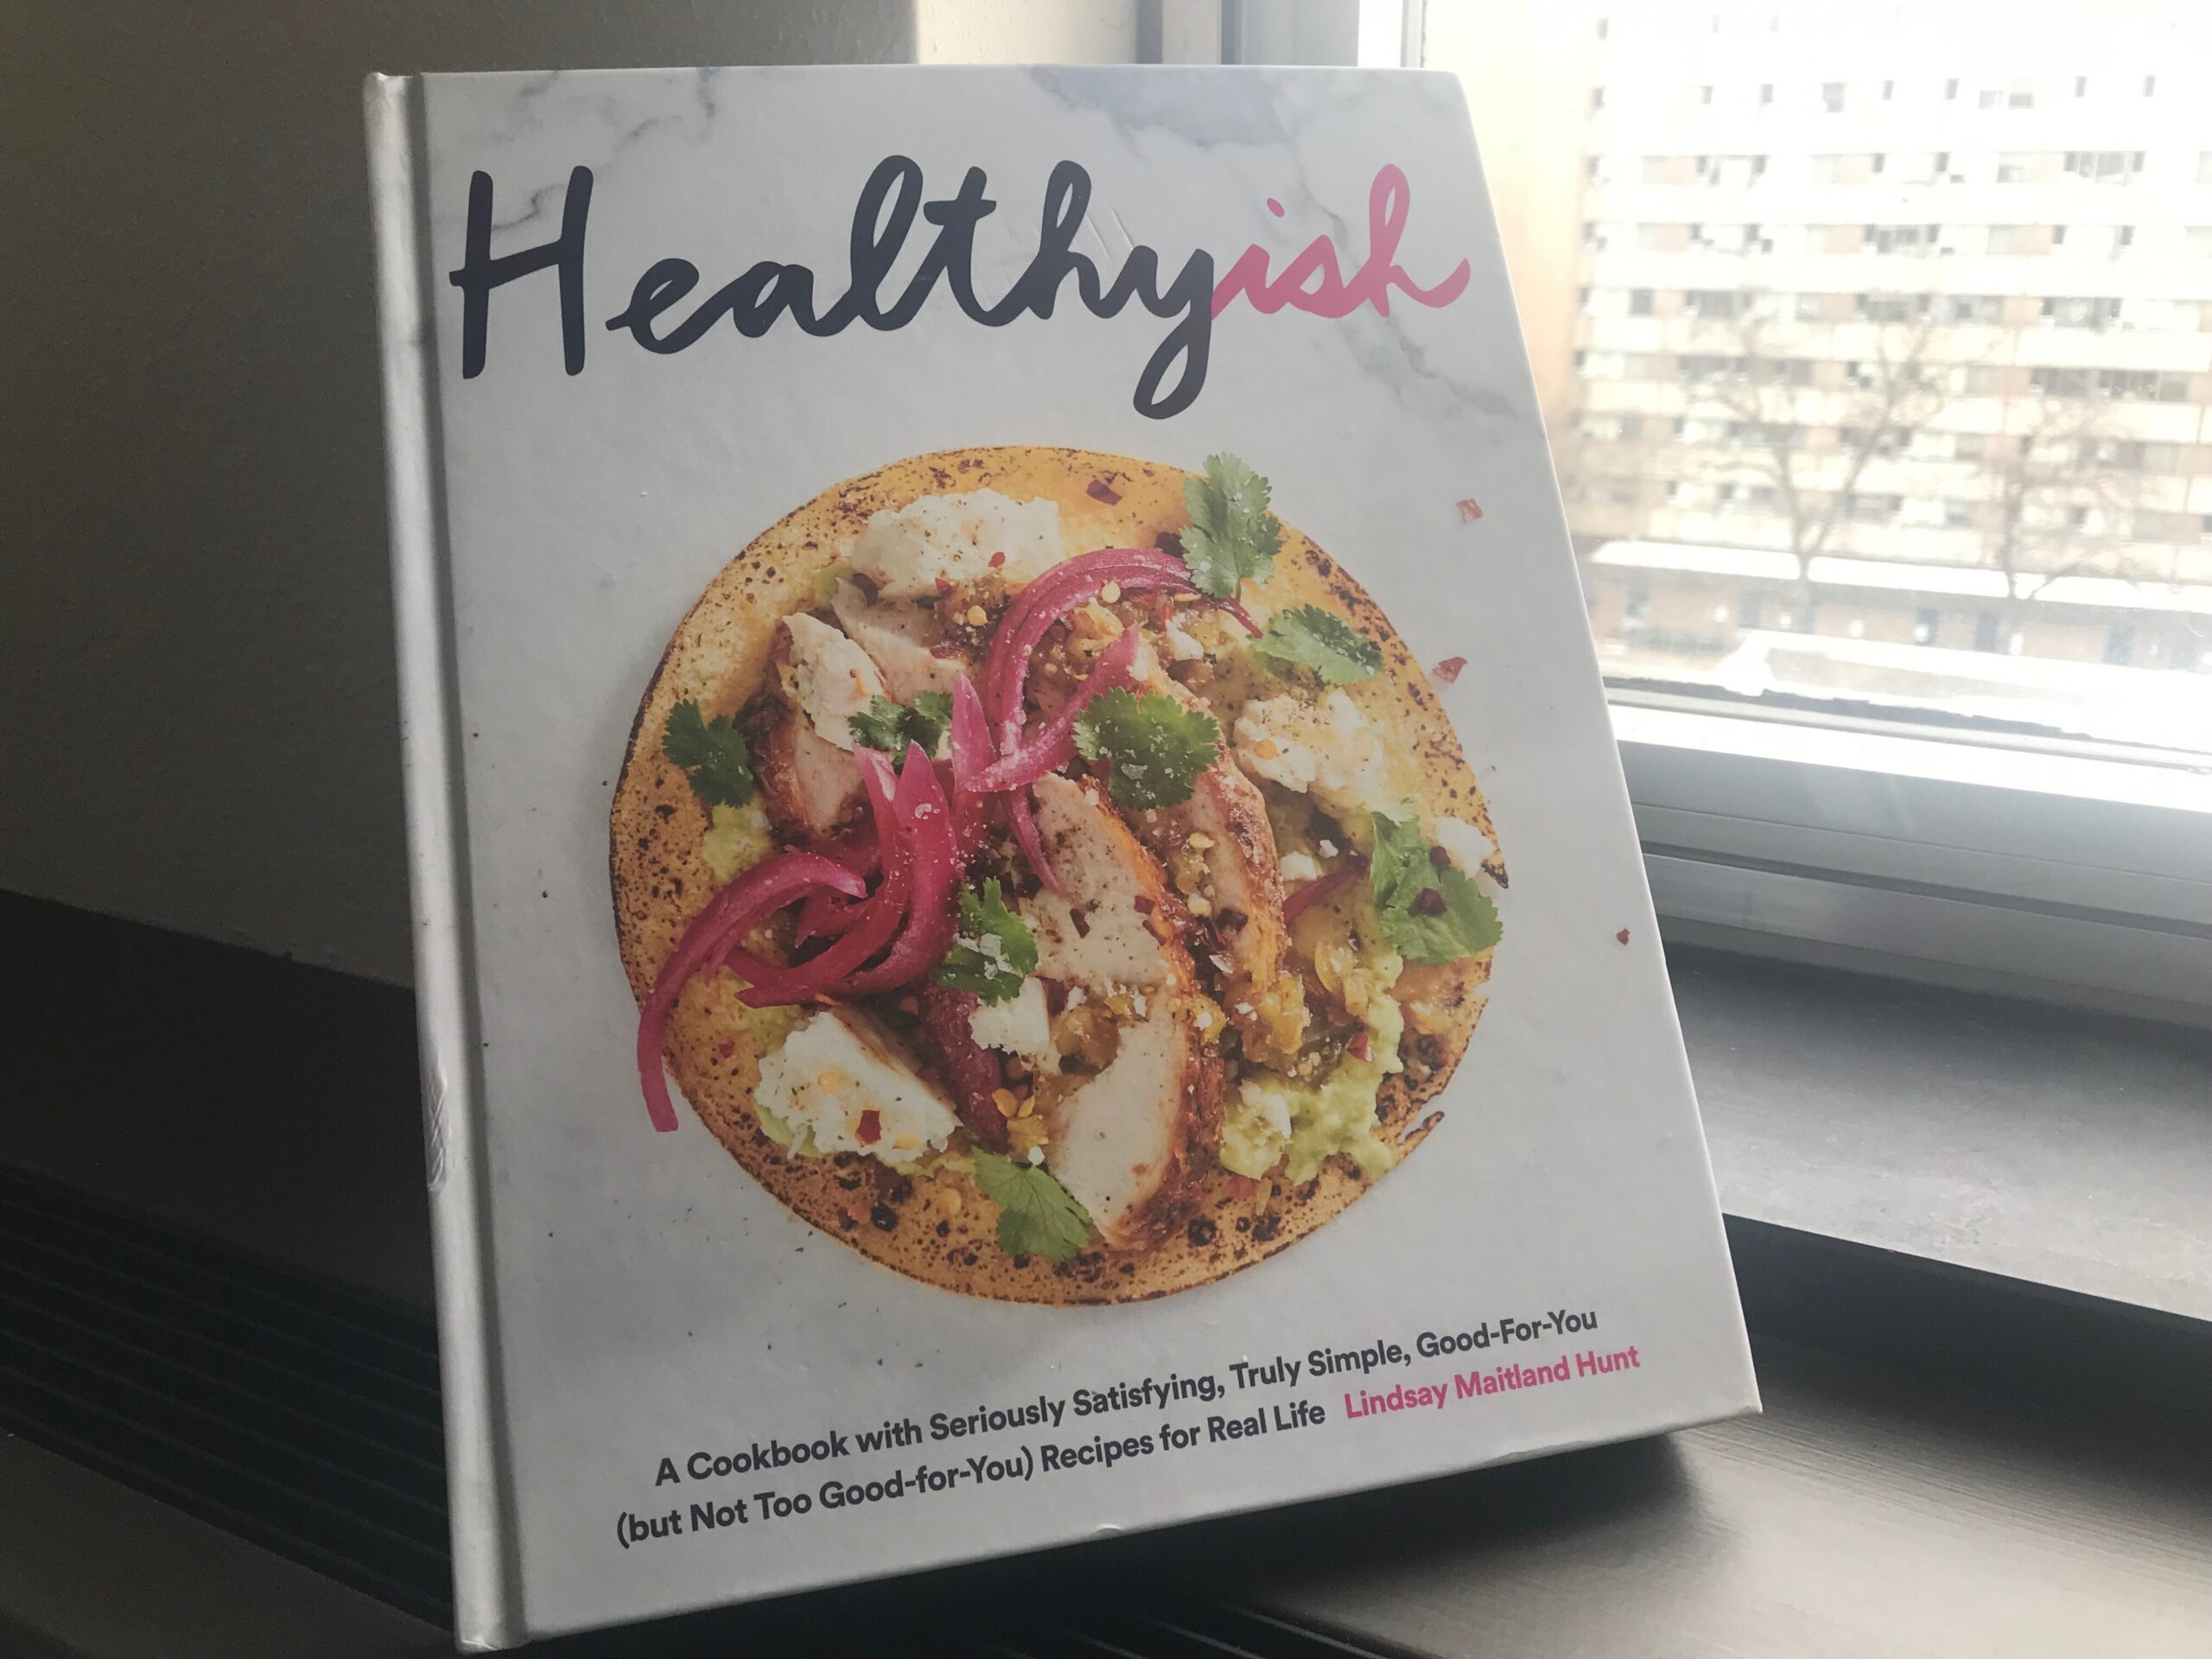 Cover of "Healthyish"